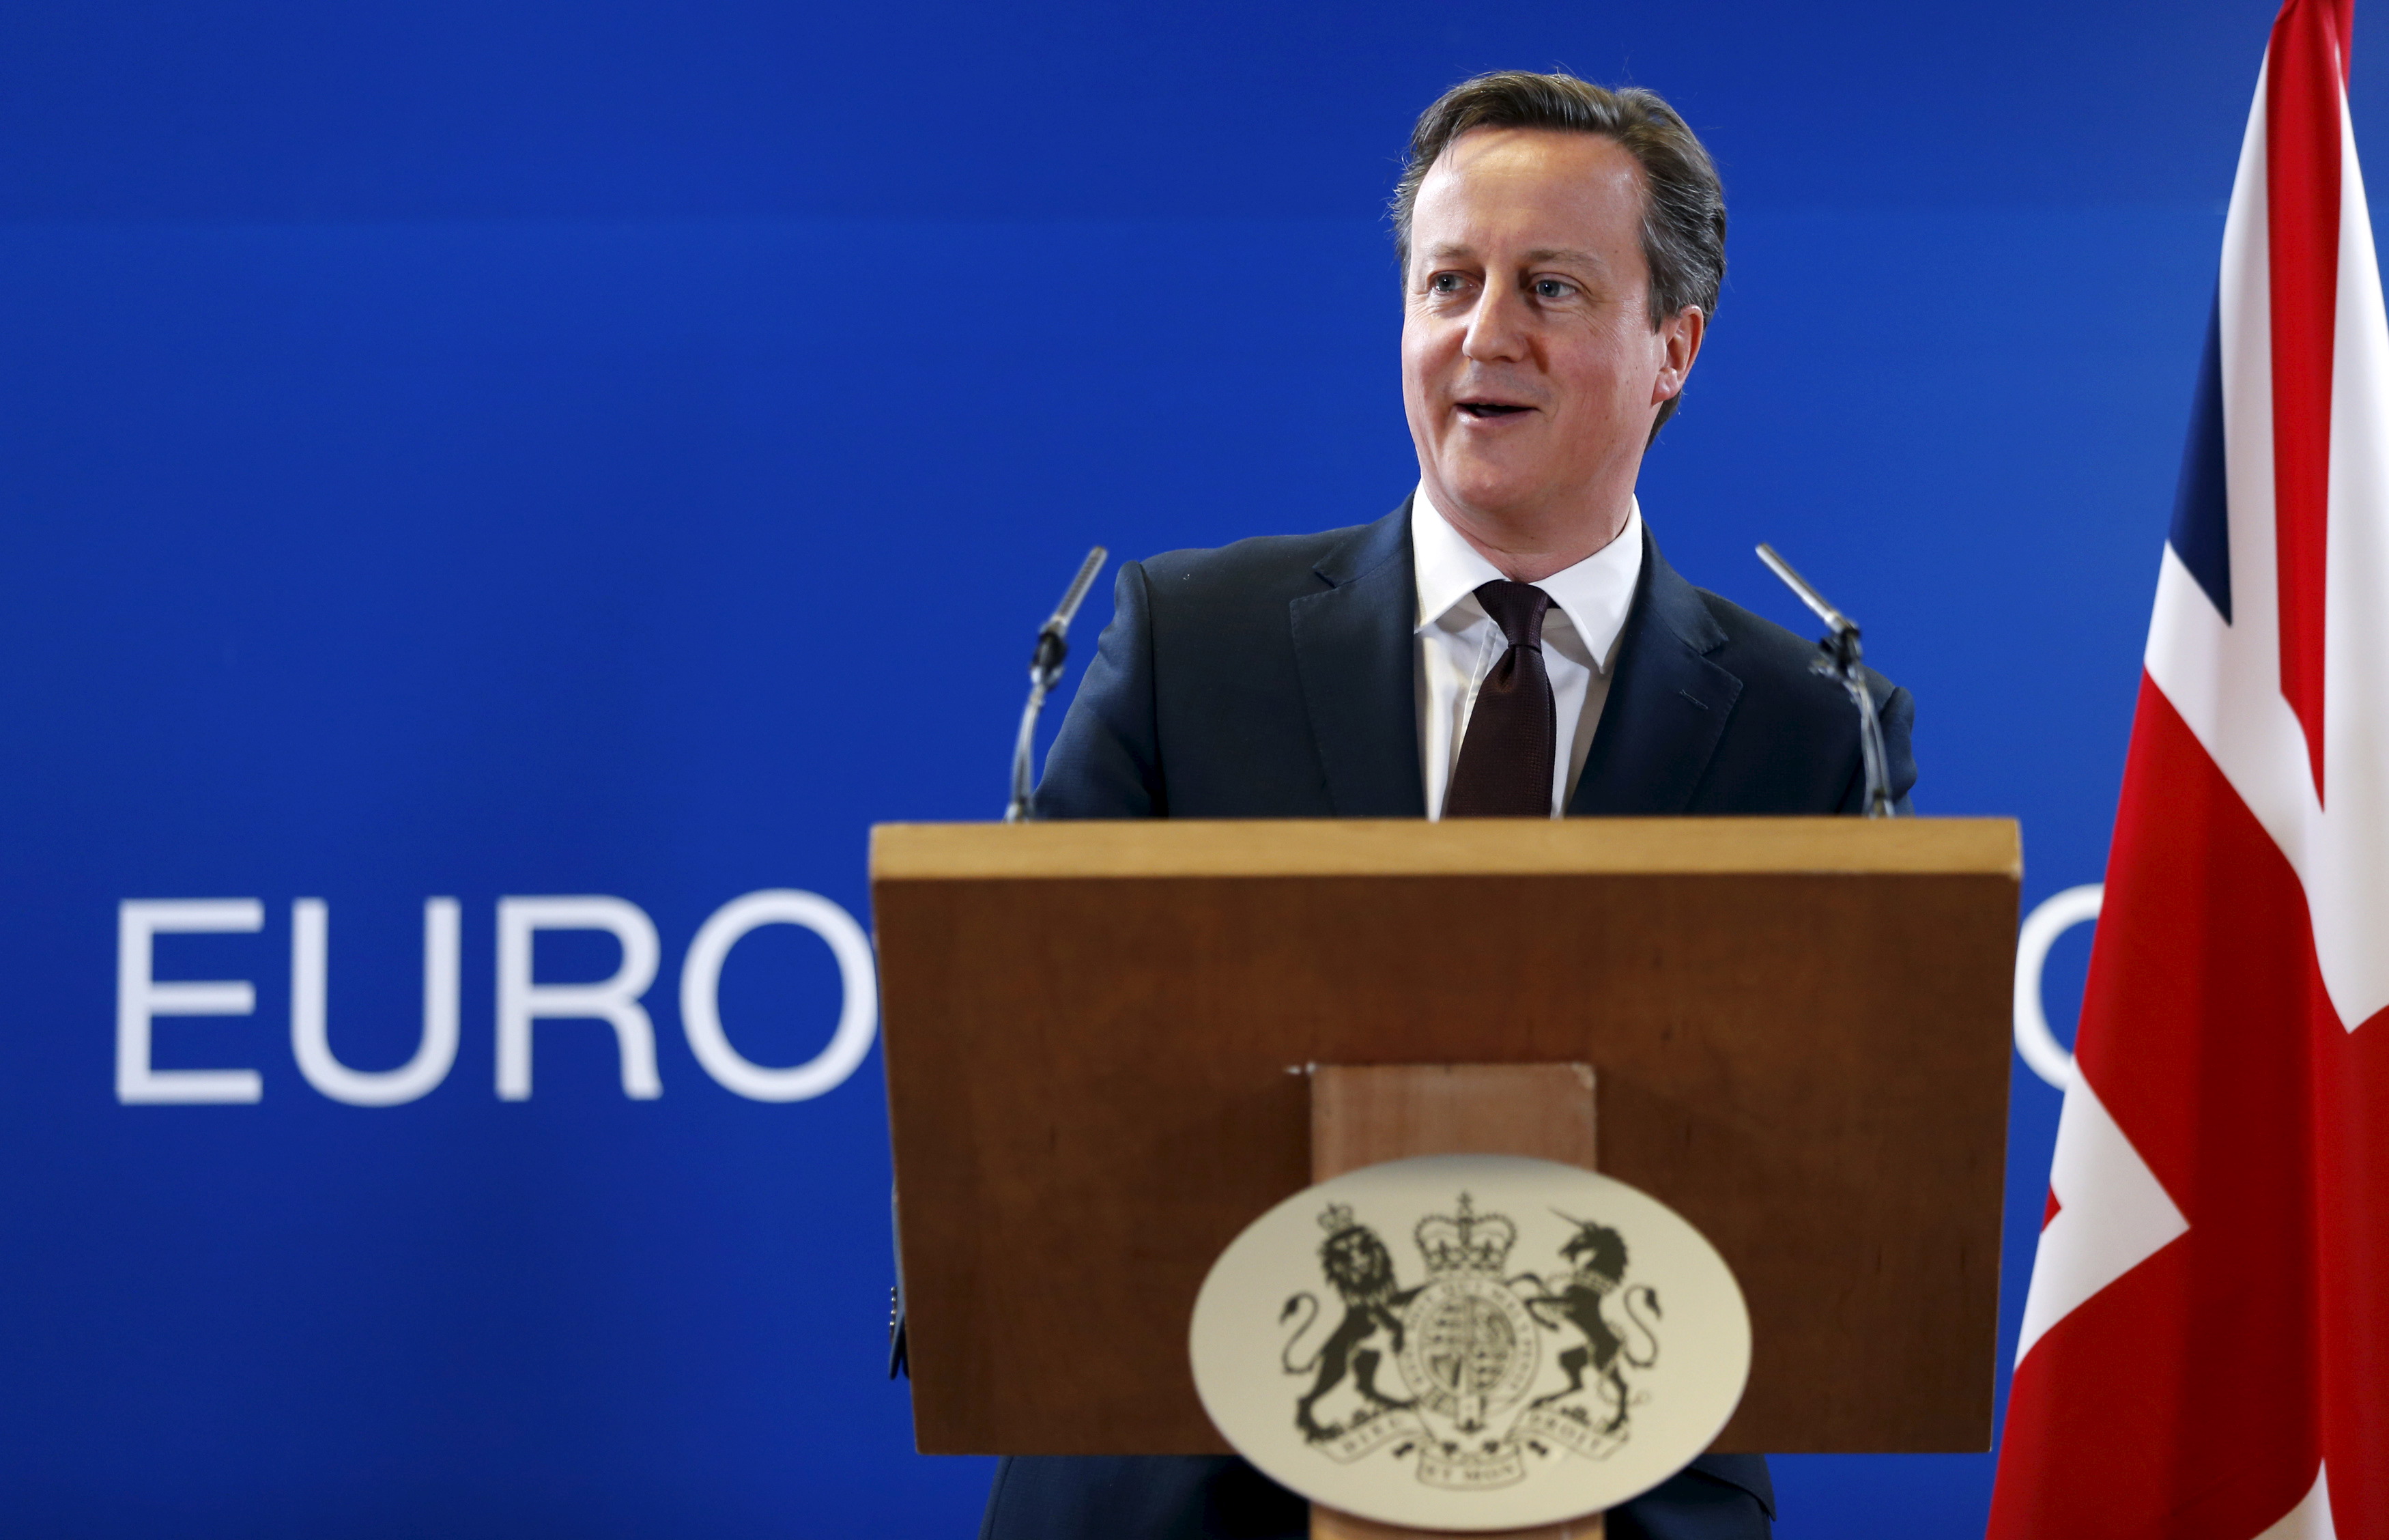 Britain's PM Cameron addresses a news conference during a EU leaders summit in Brussels